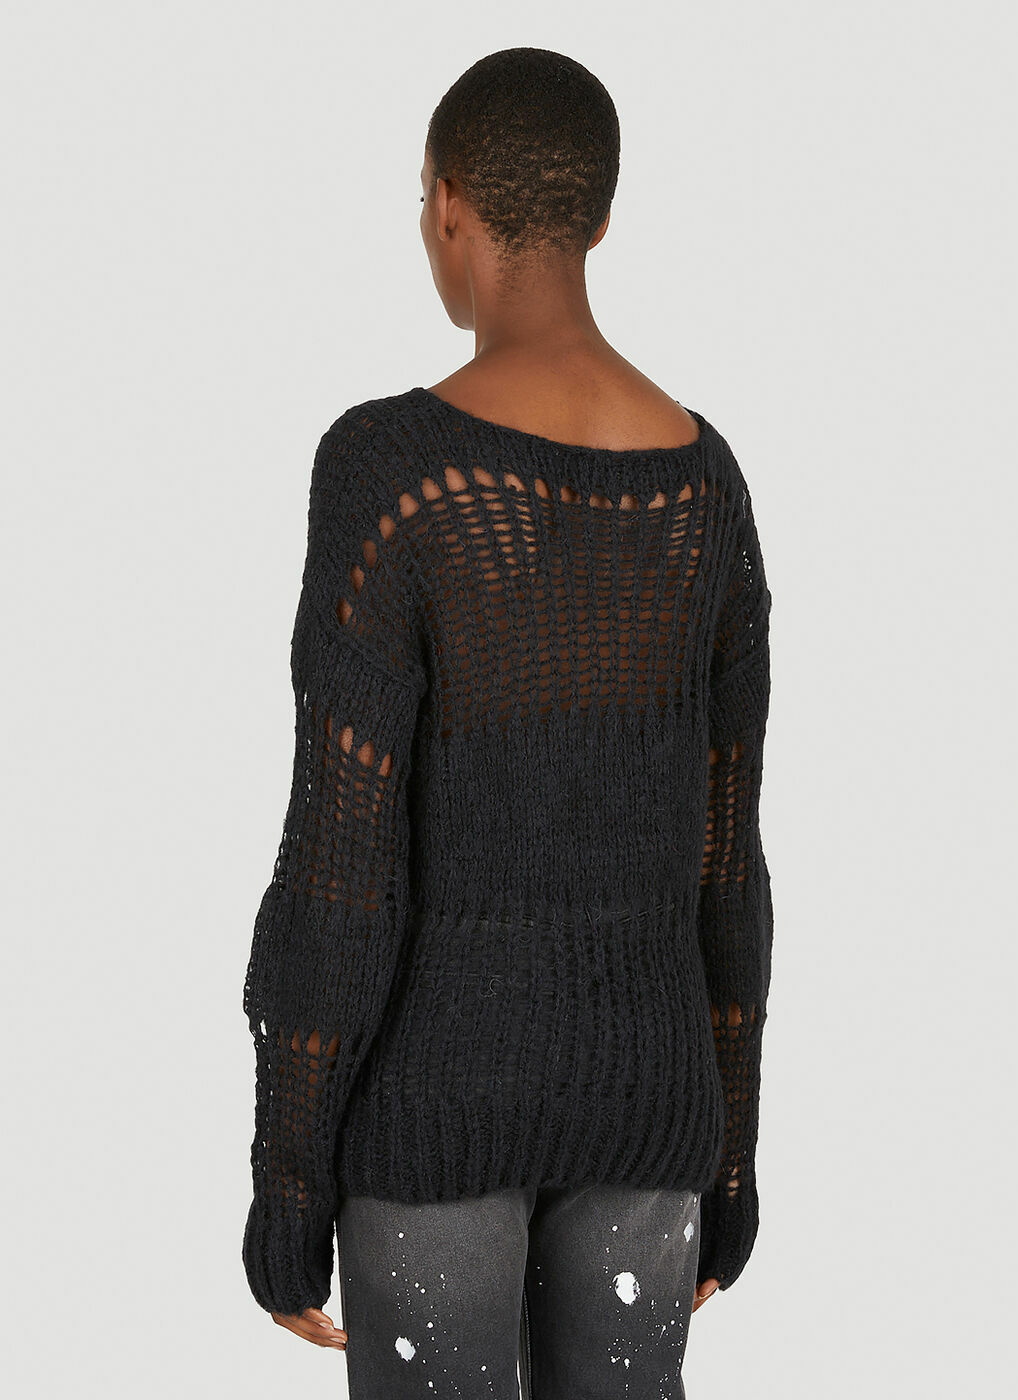 Irregular Net Sweater in Black TheOpen Product